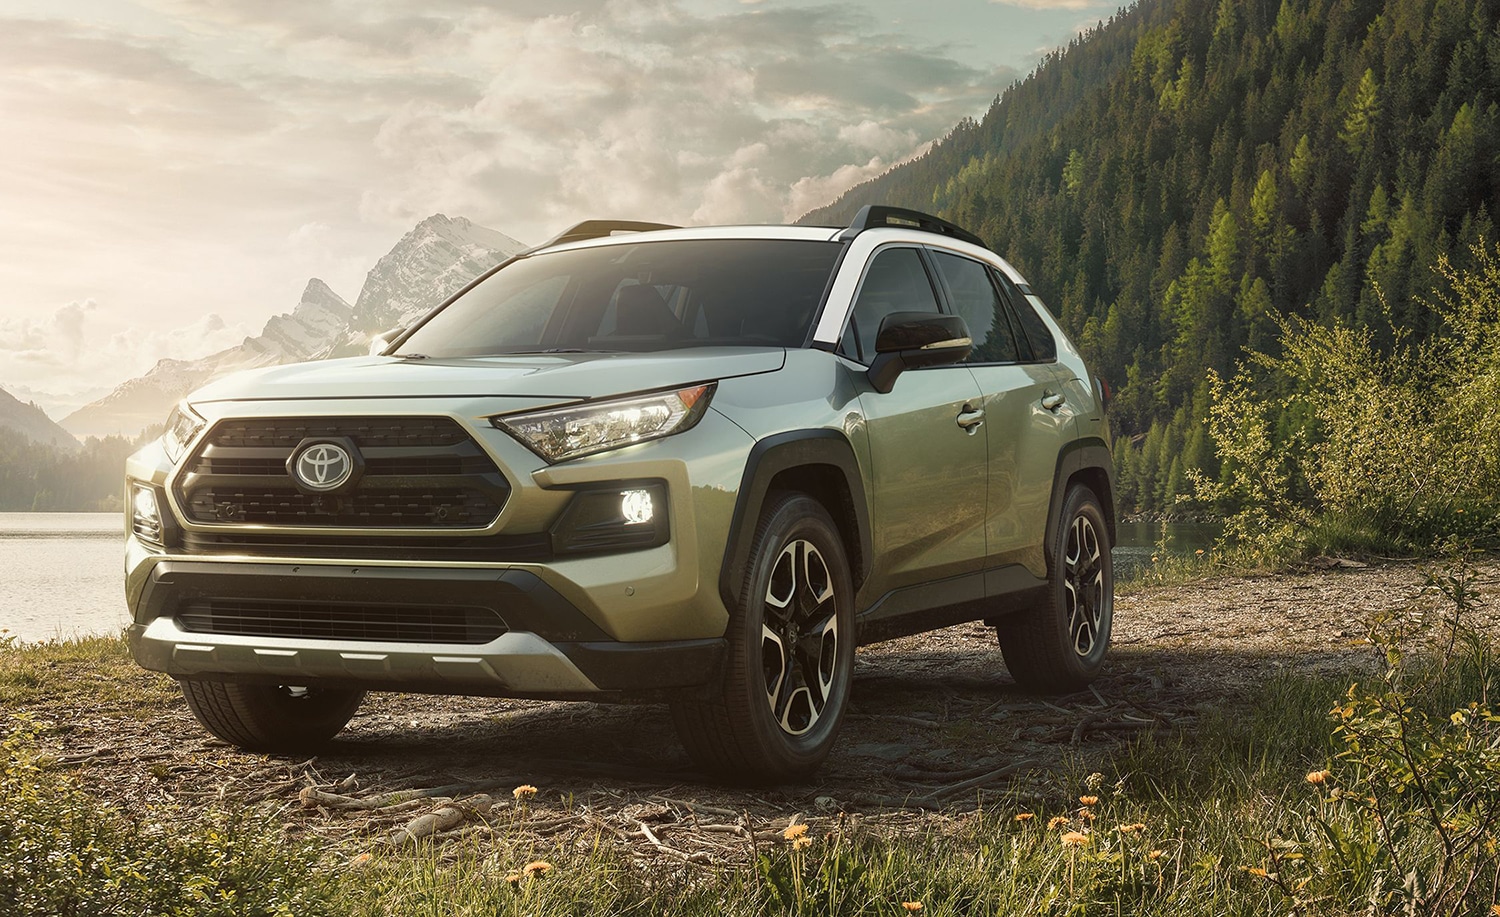 Image of a green 2019 Toyota RAV4 parked in the wilderness.